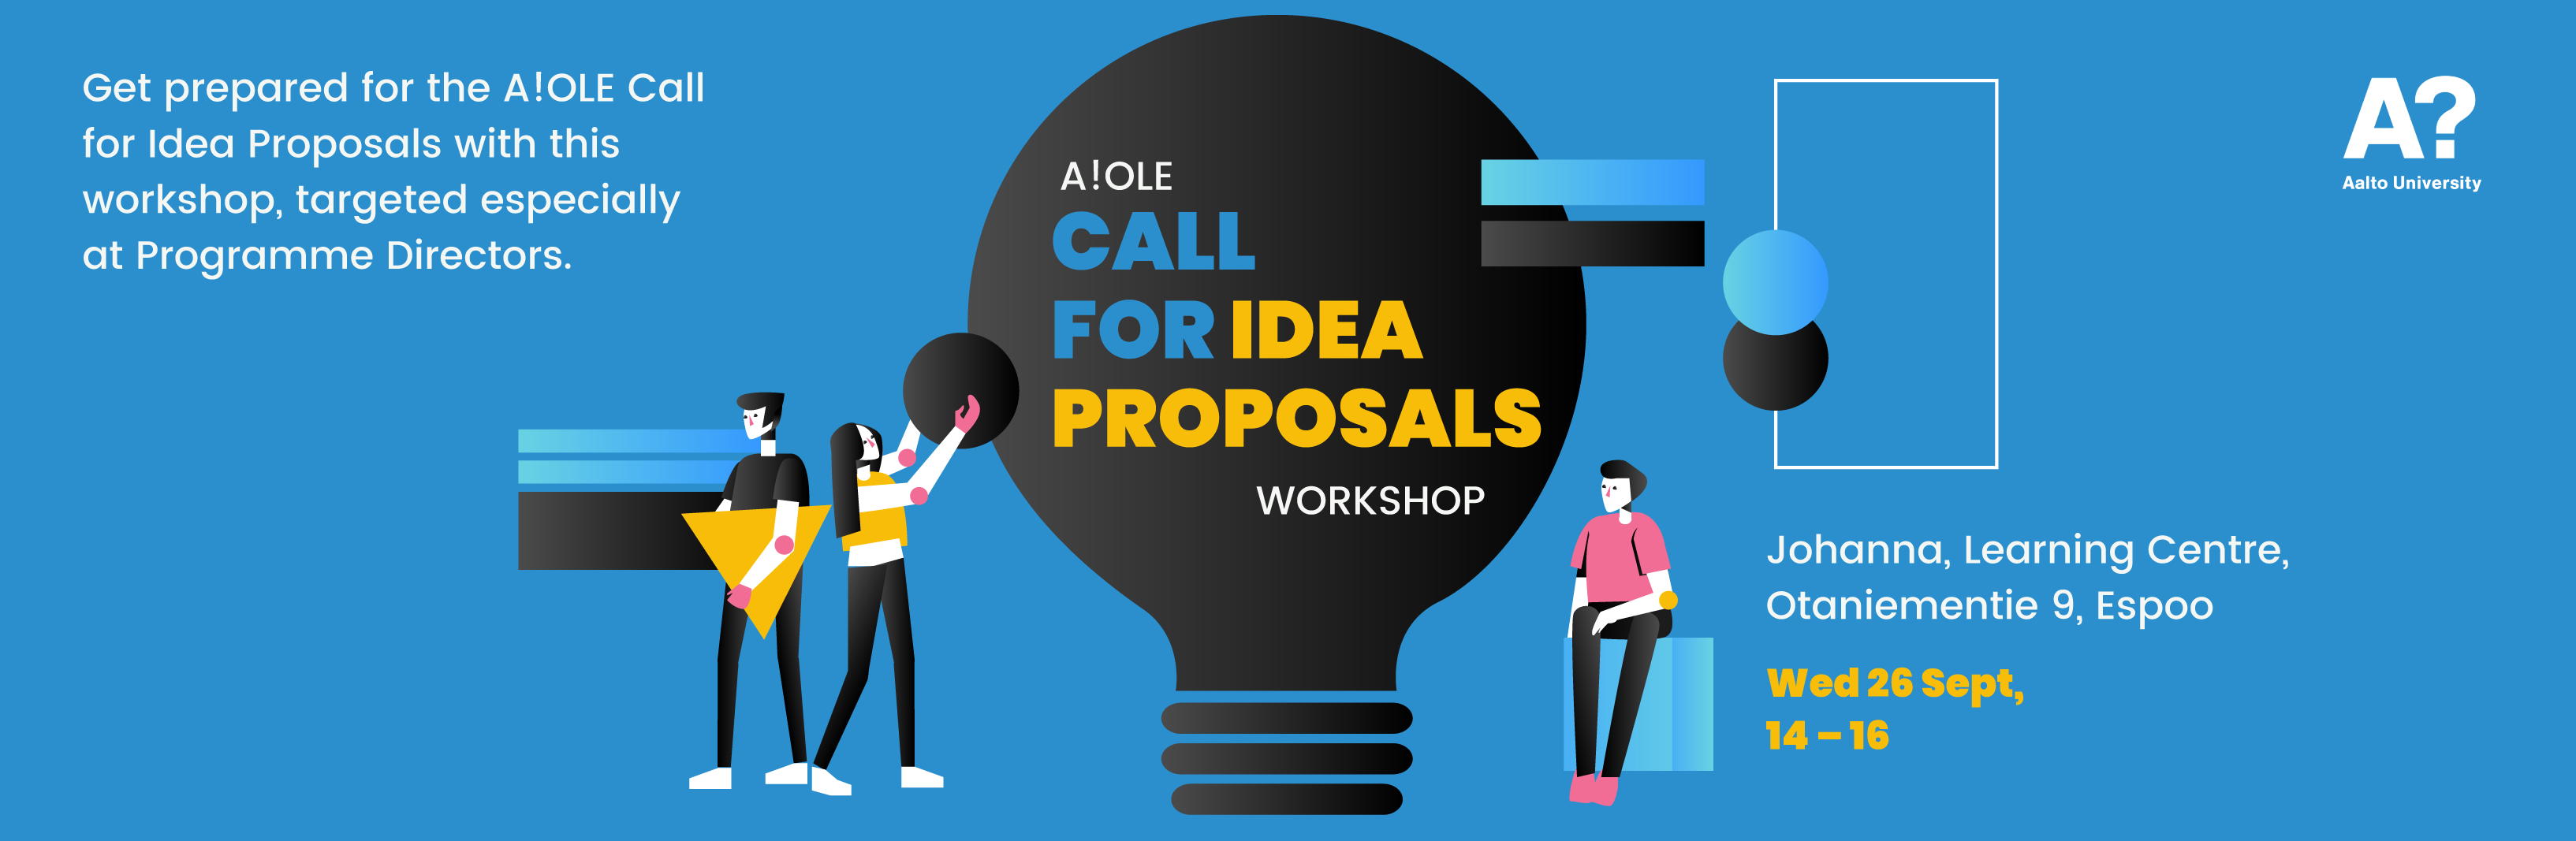 Workshop on Call for Idea Proposals